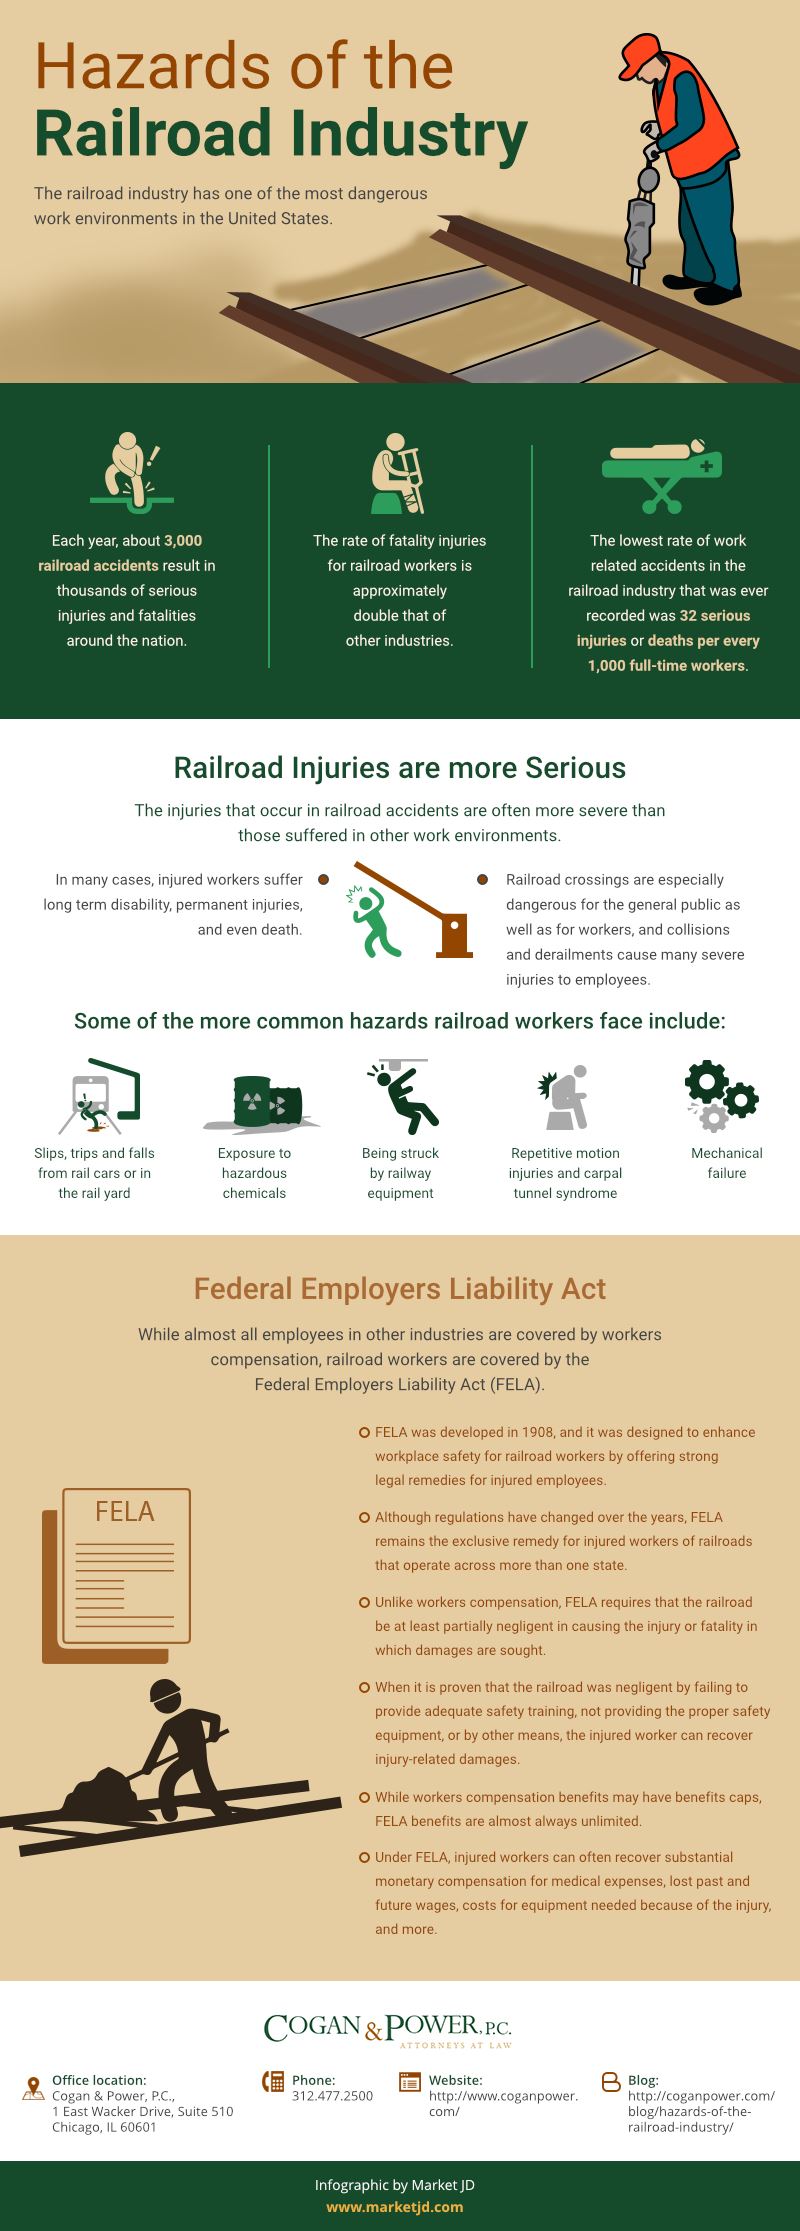 Hazards of The Railroad Industry